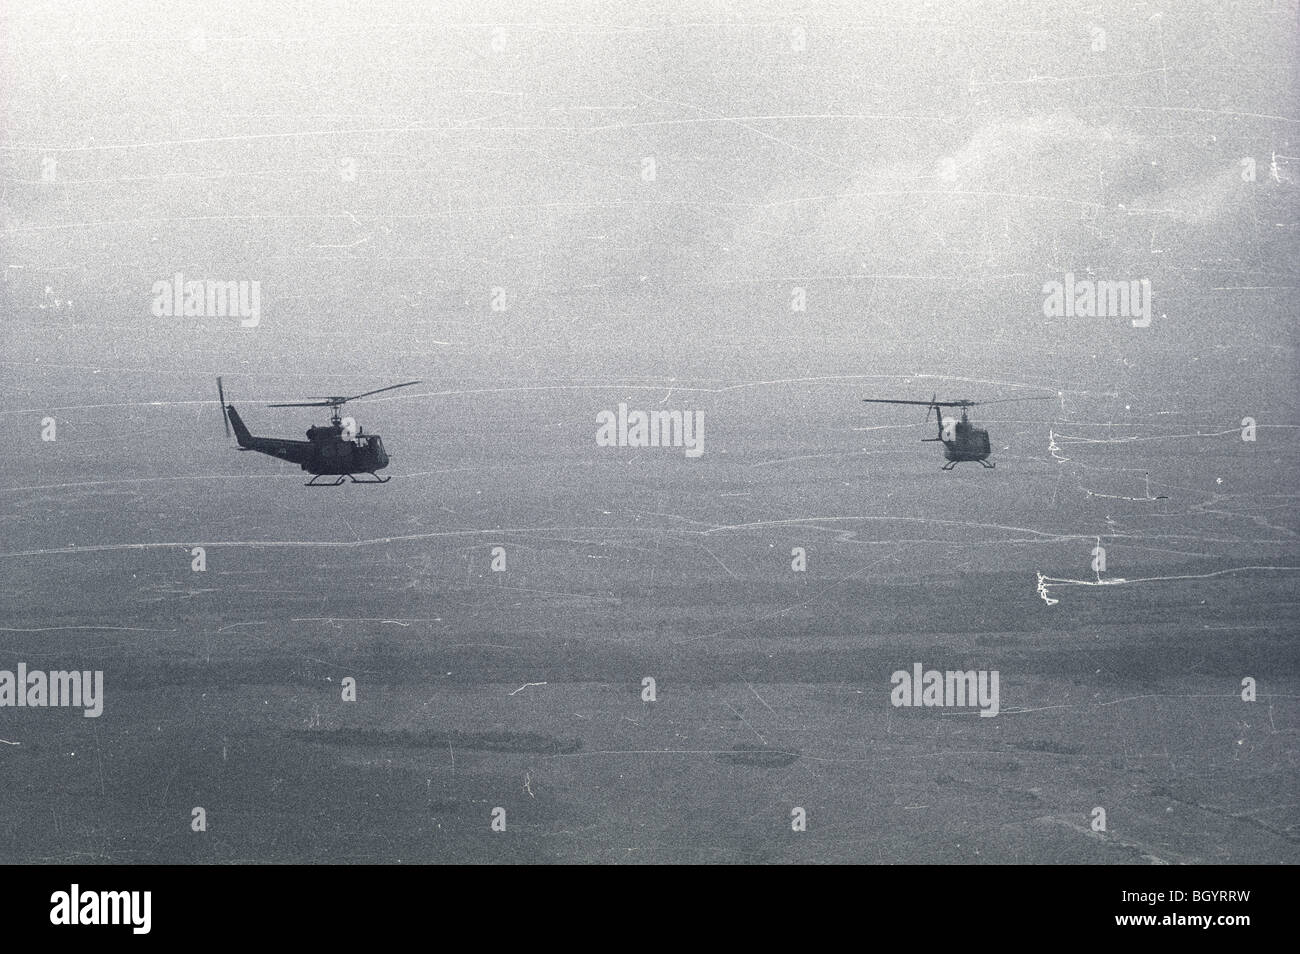 Two helicopters of the 121st AHC out of Soc Trang, Vietnam, fly in formation on a mission during the Vietnam War. Stock Photo